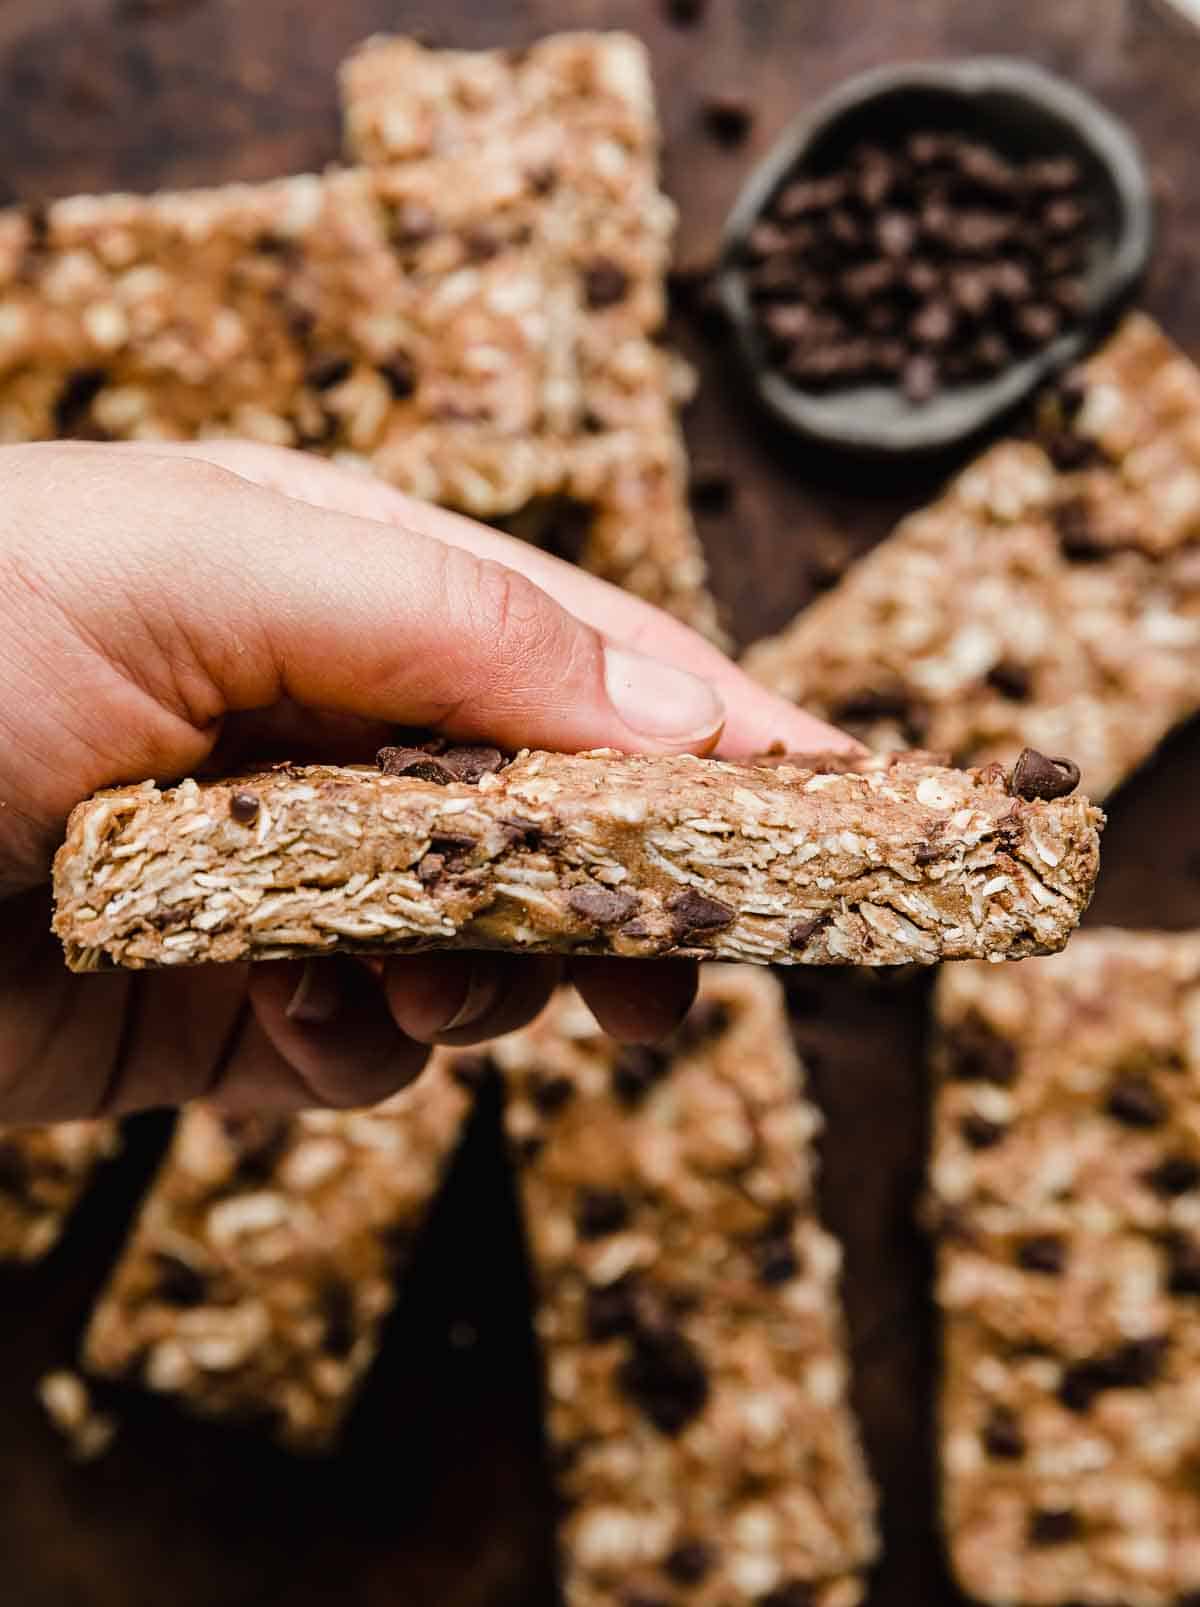 A hand holding a Chocolate Peanut Butter Protein Bar.